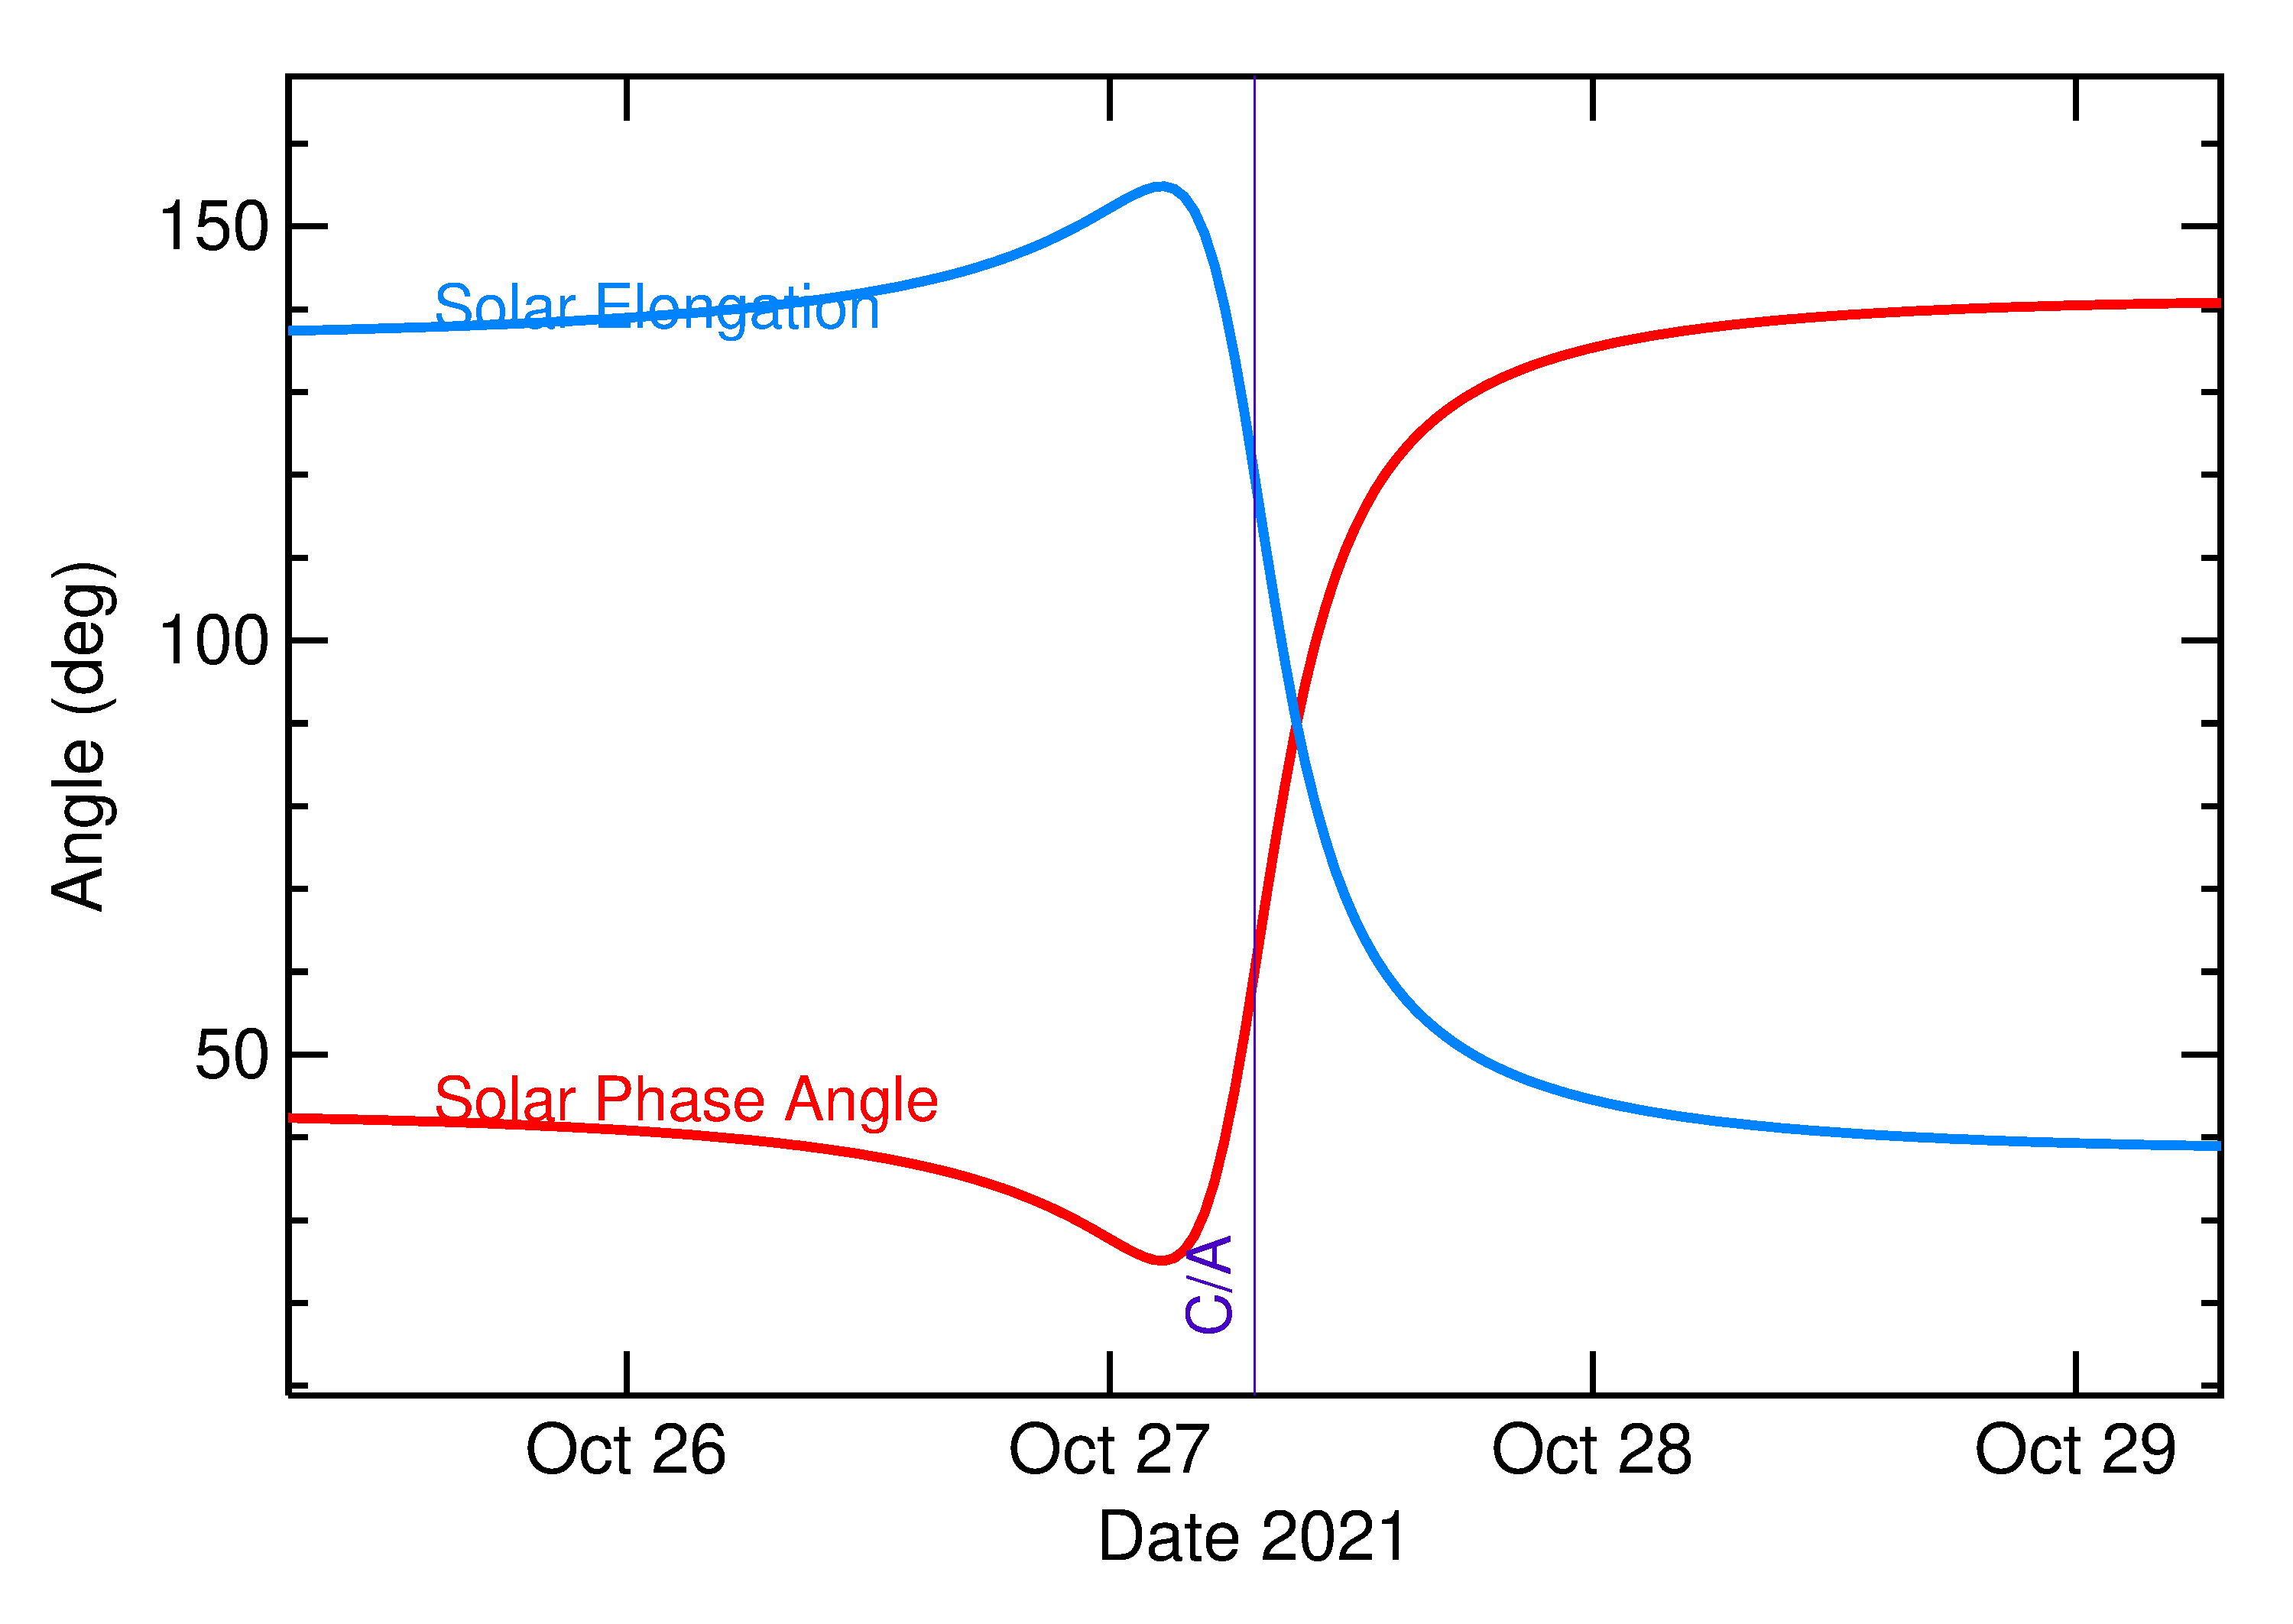 Solar Elongation and Solar Phase Angle of 2021 UH1 in the days around closest approach